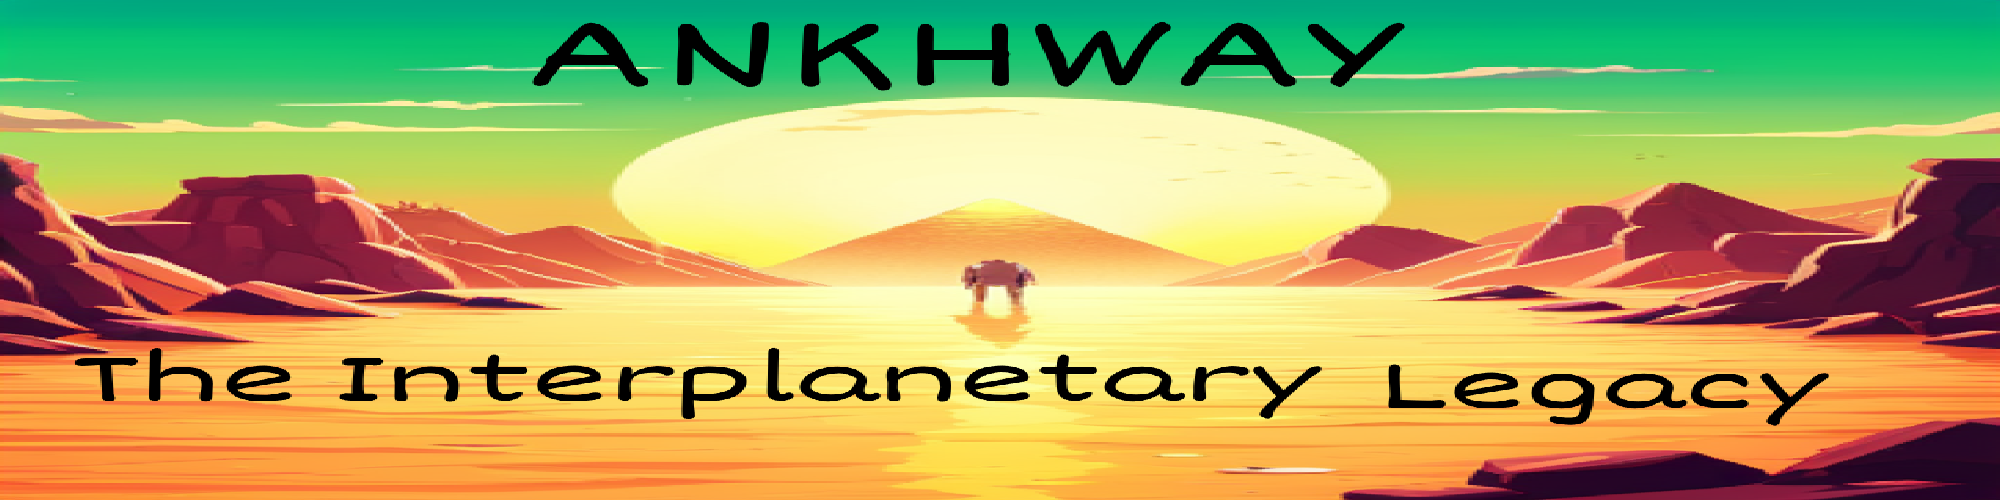 Ankhway: The Interplanetary Legacy (Demo)